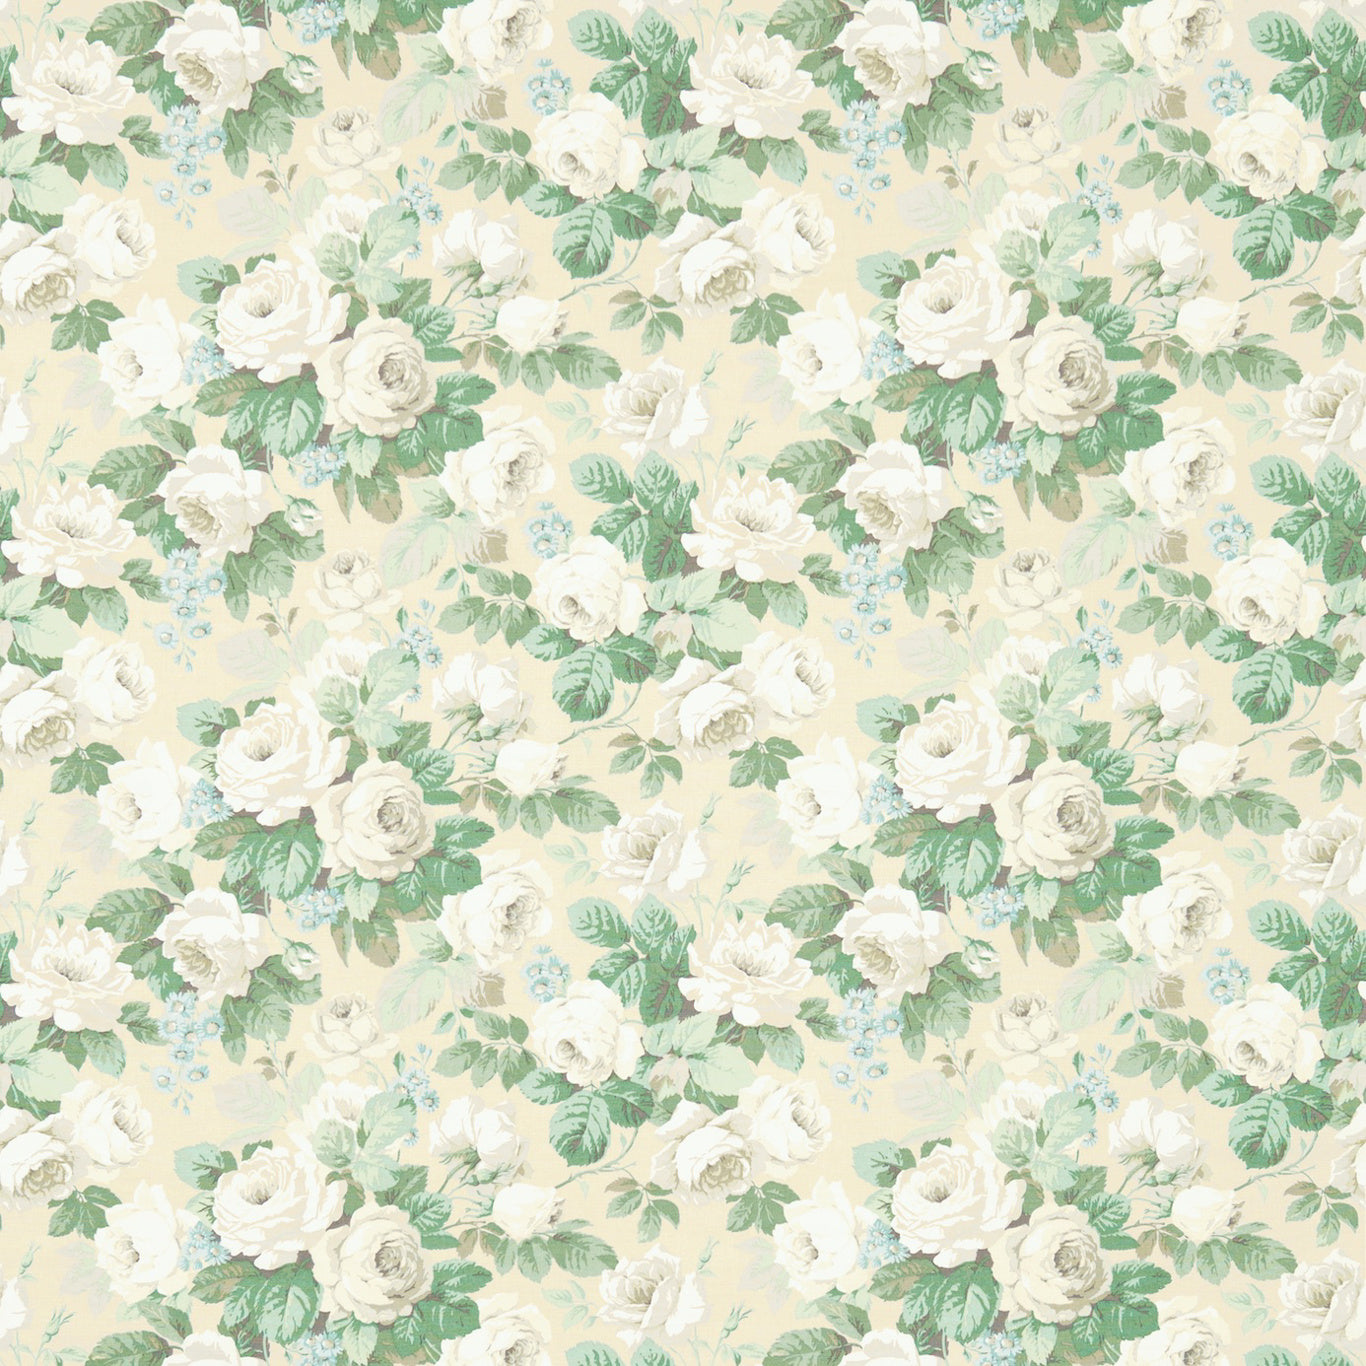 Chelsea Fabric by Sanderson - DVIN224318 - Sage/Ivory